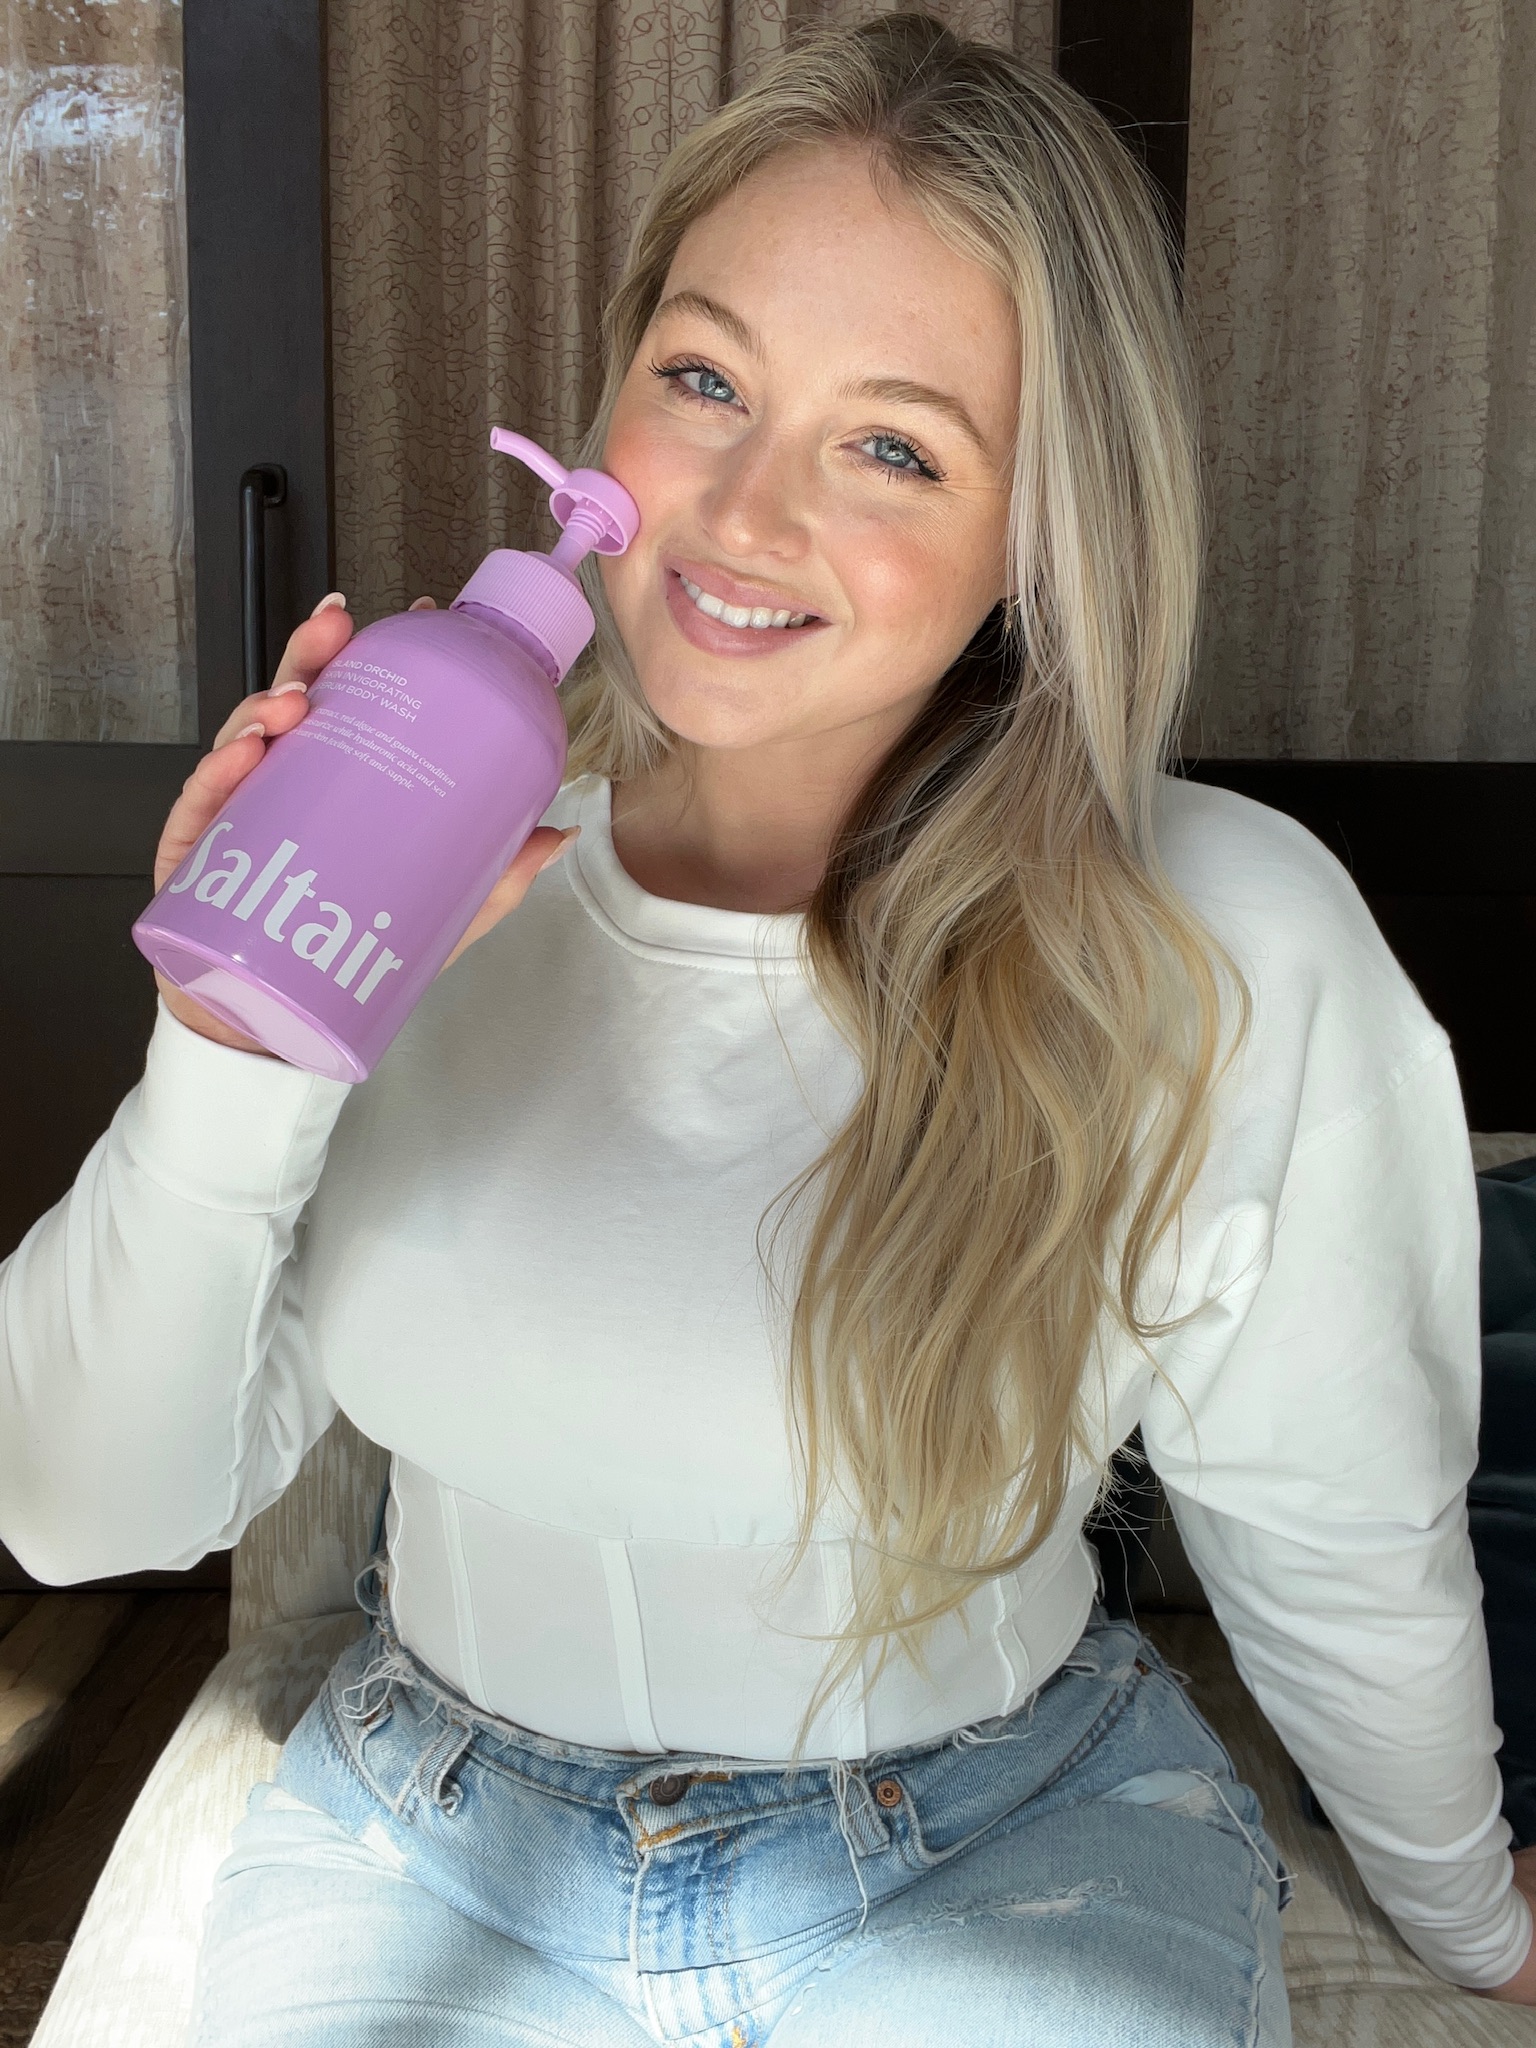 Iskra holding a Saltair body wash (island orchid scent)